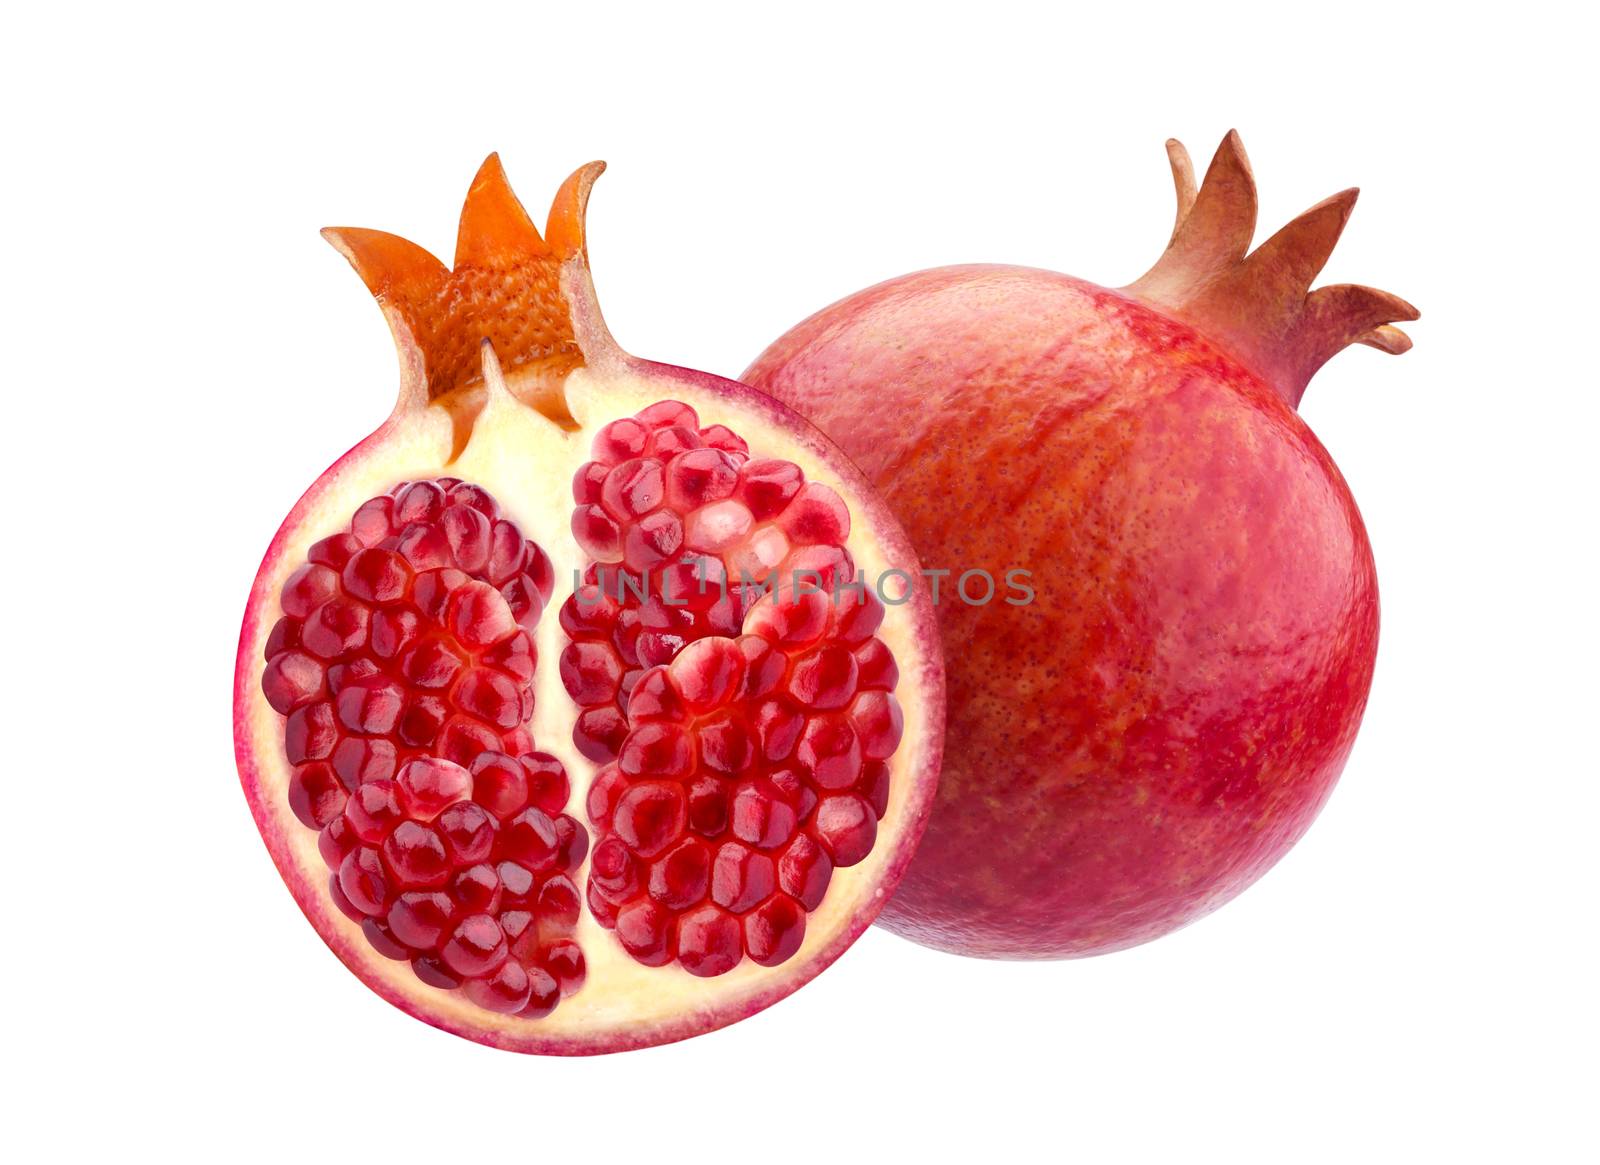 Pomegranate isolated. Group of pomegranates isolated on white background with clipping path